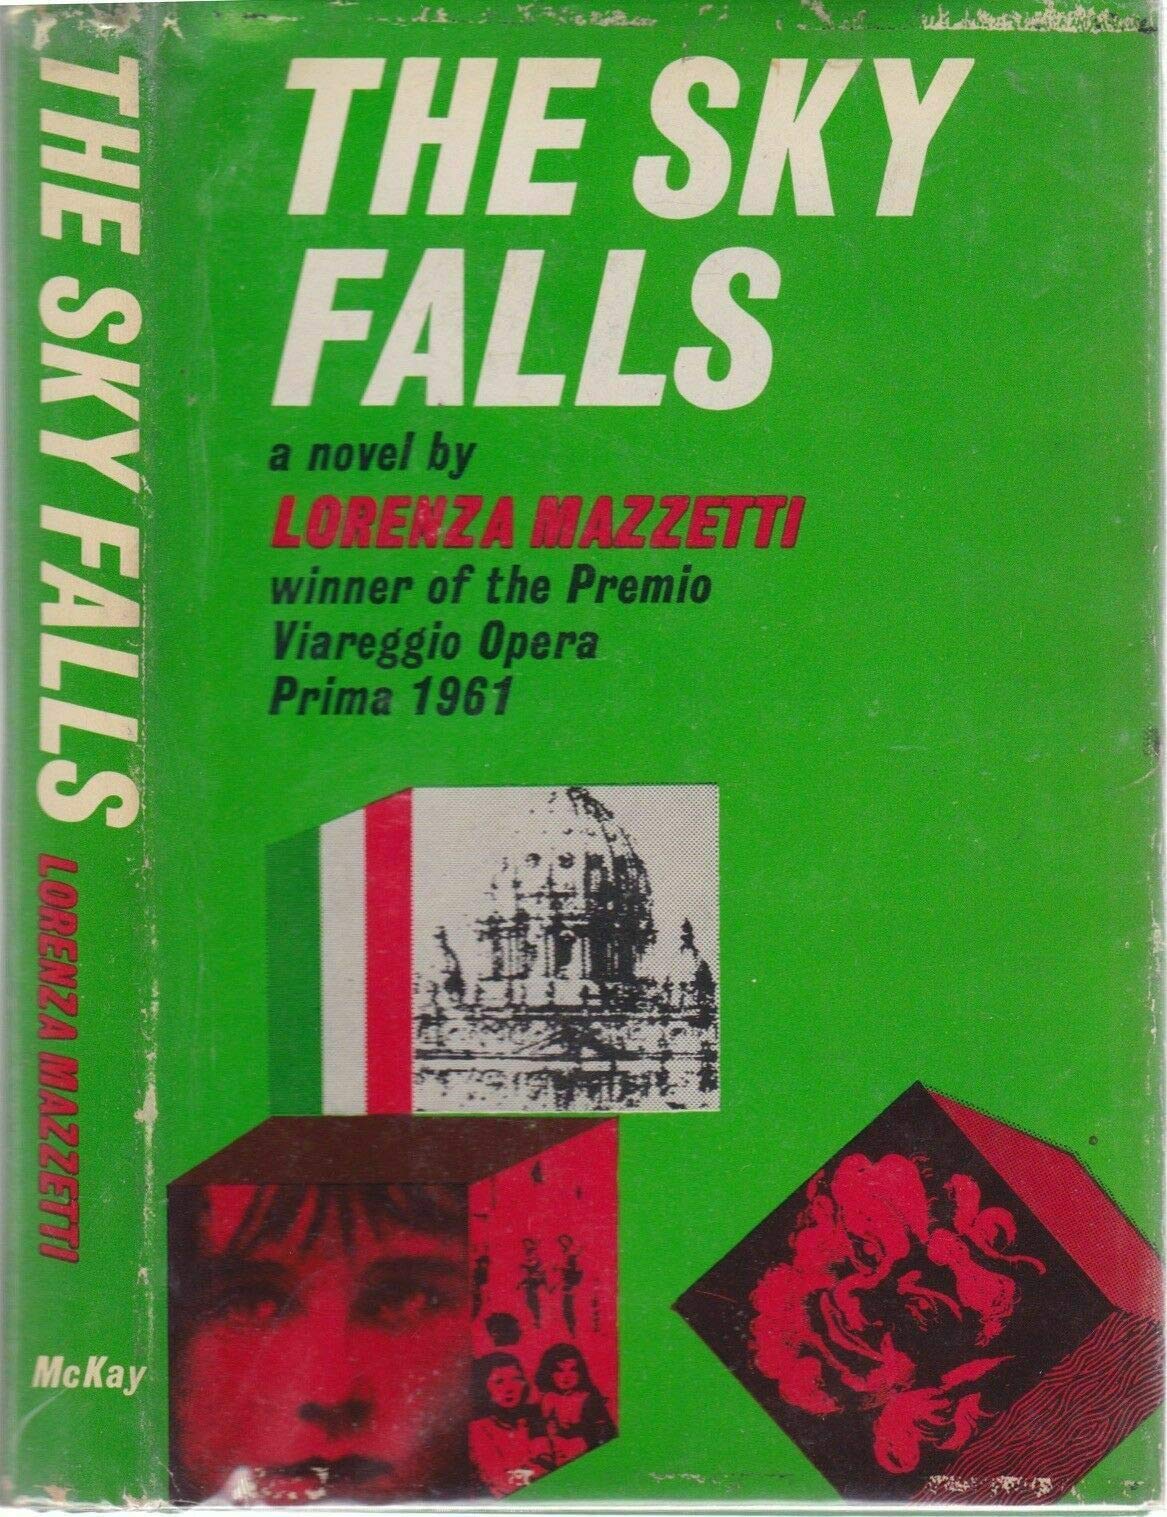 Book cover of "The Sky Falls"